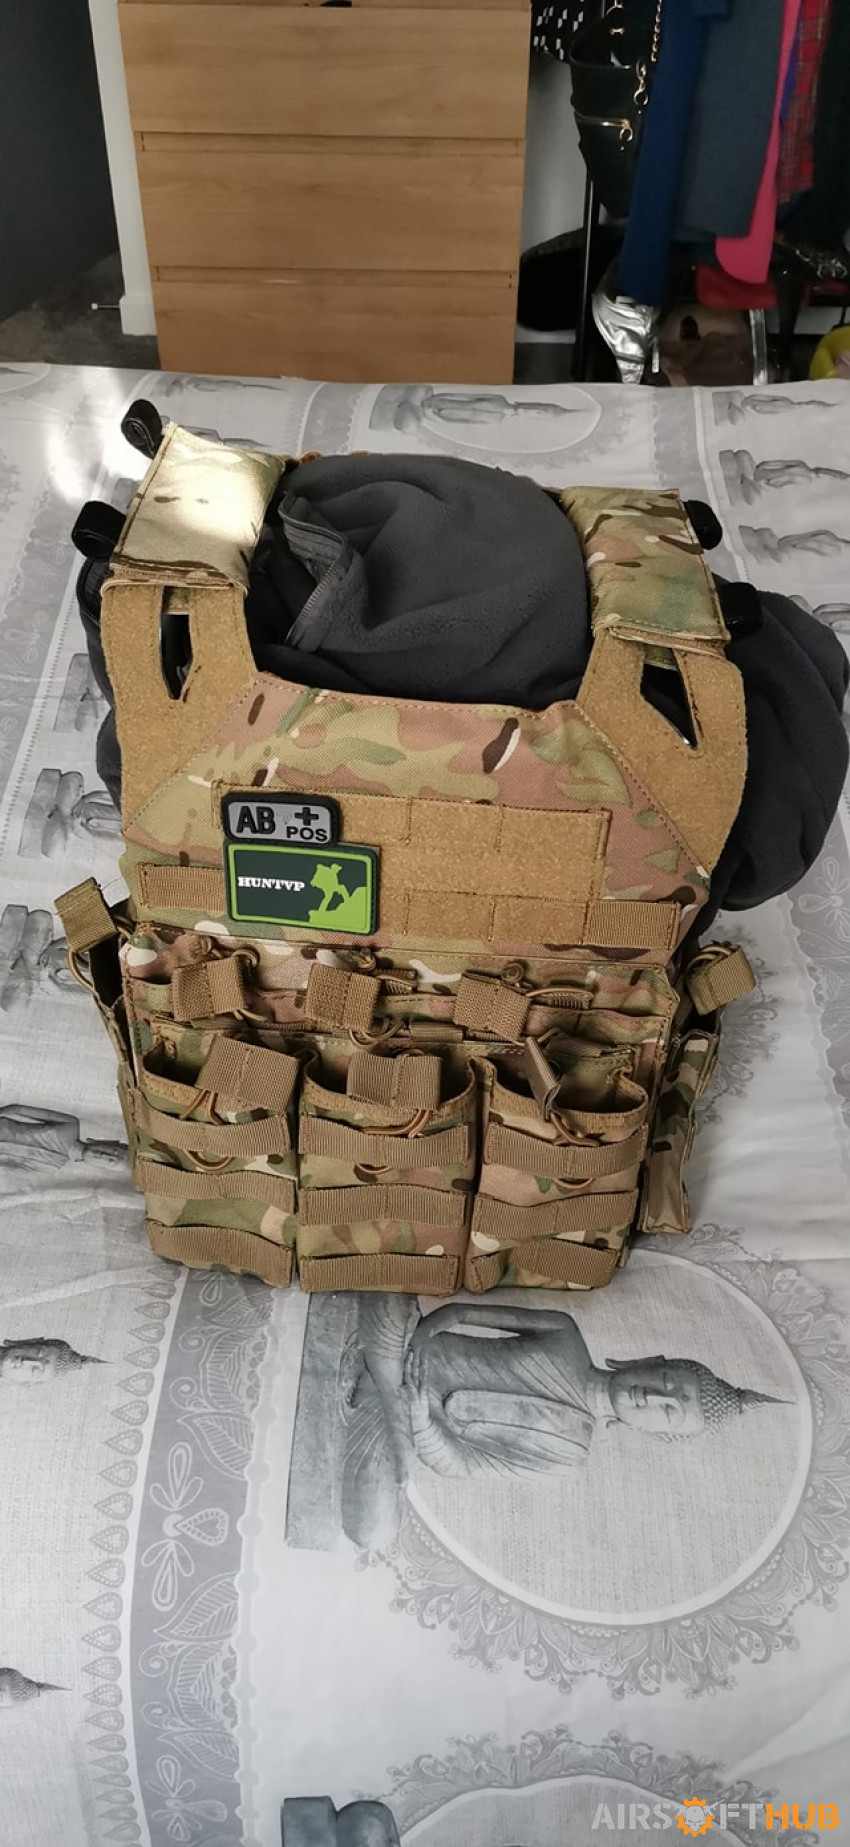 *Fields Tactical Jump Plate - Used airsoft equipment